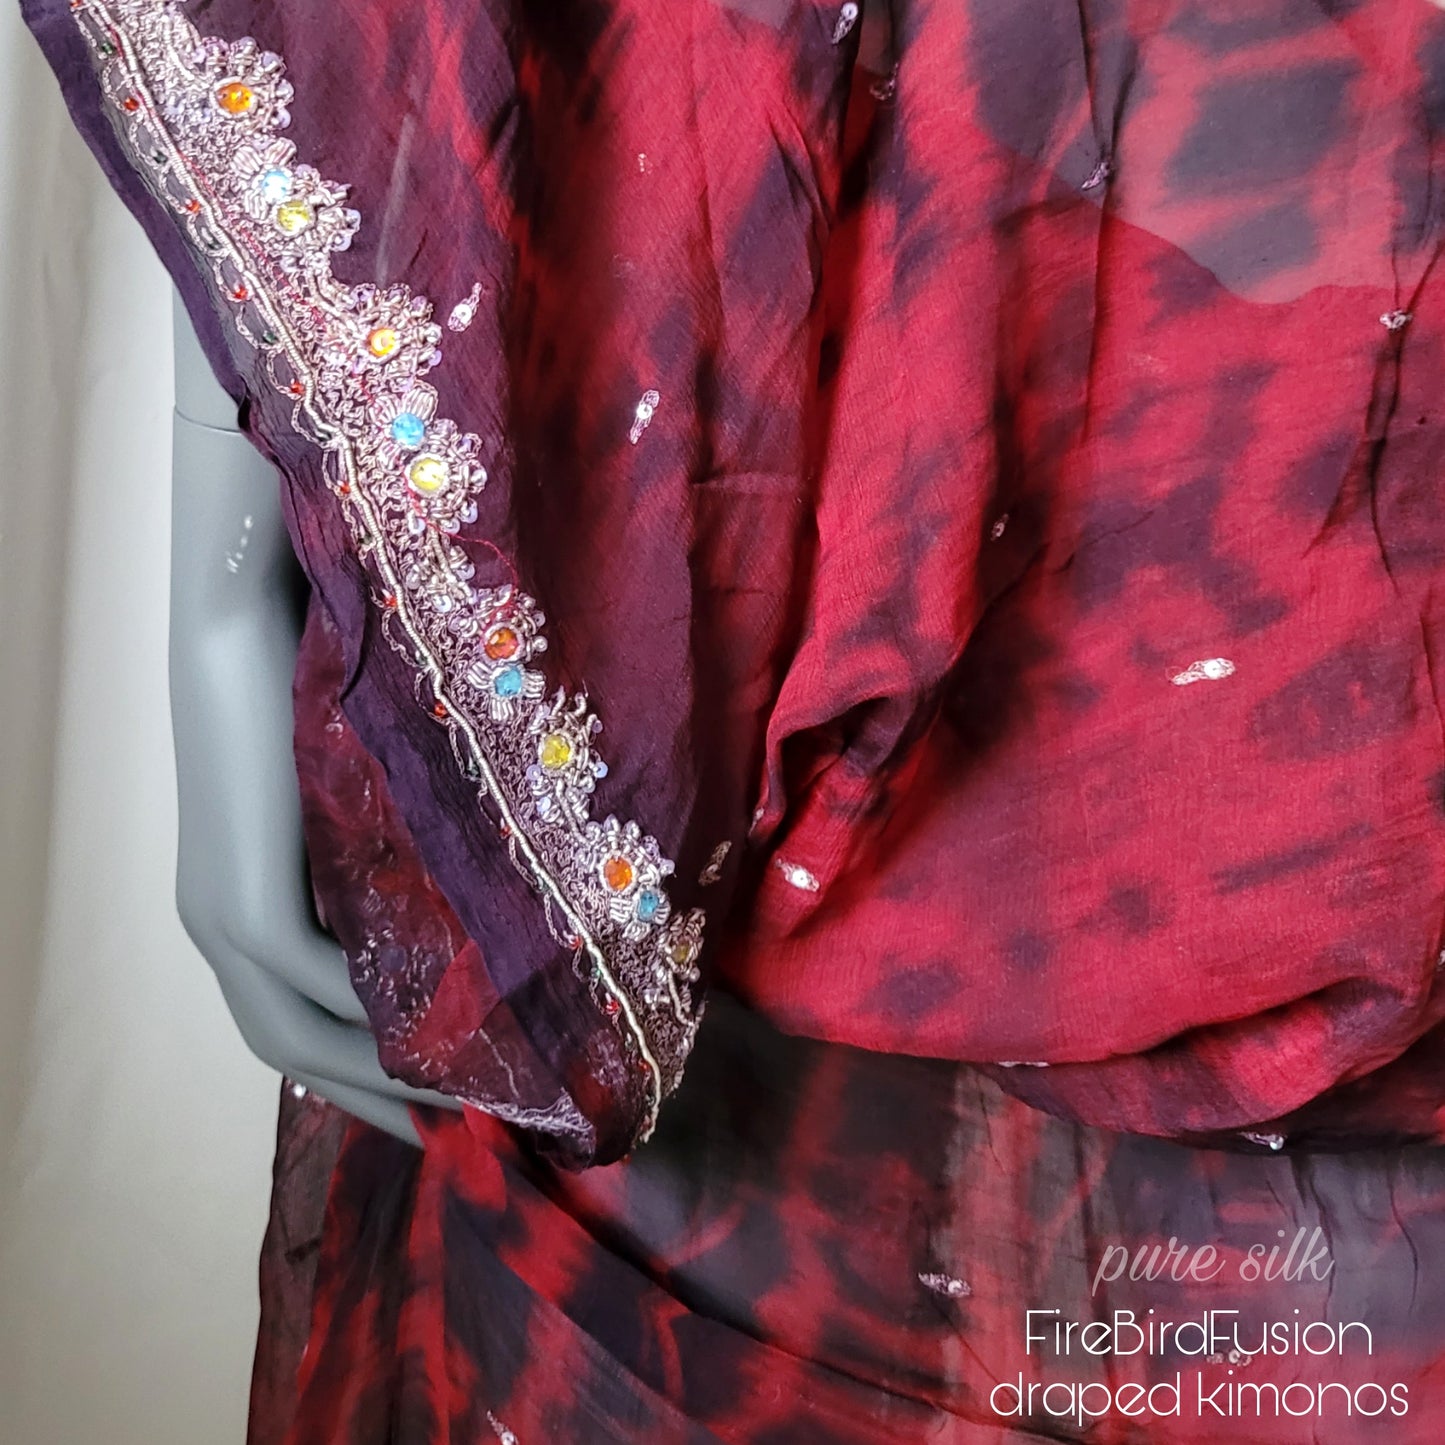 Luxurious draped kimono in pure silk, hand dyed batik in red and black with stunning zardozi embroidery in silver (L)